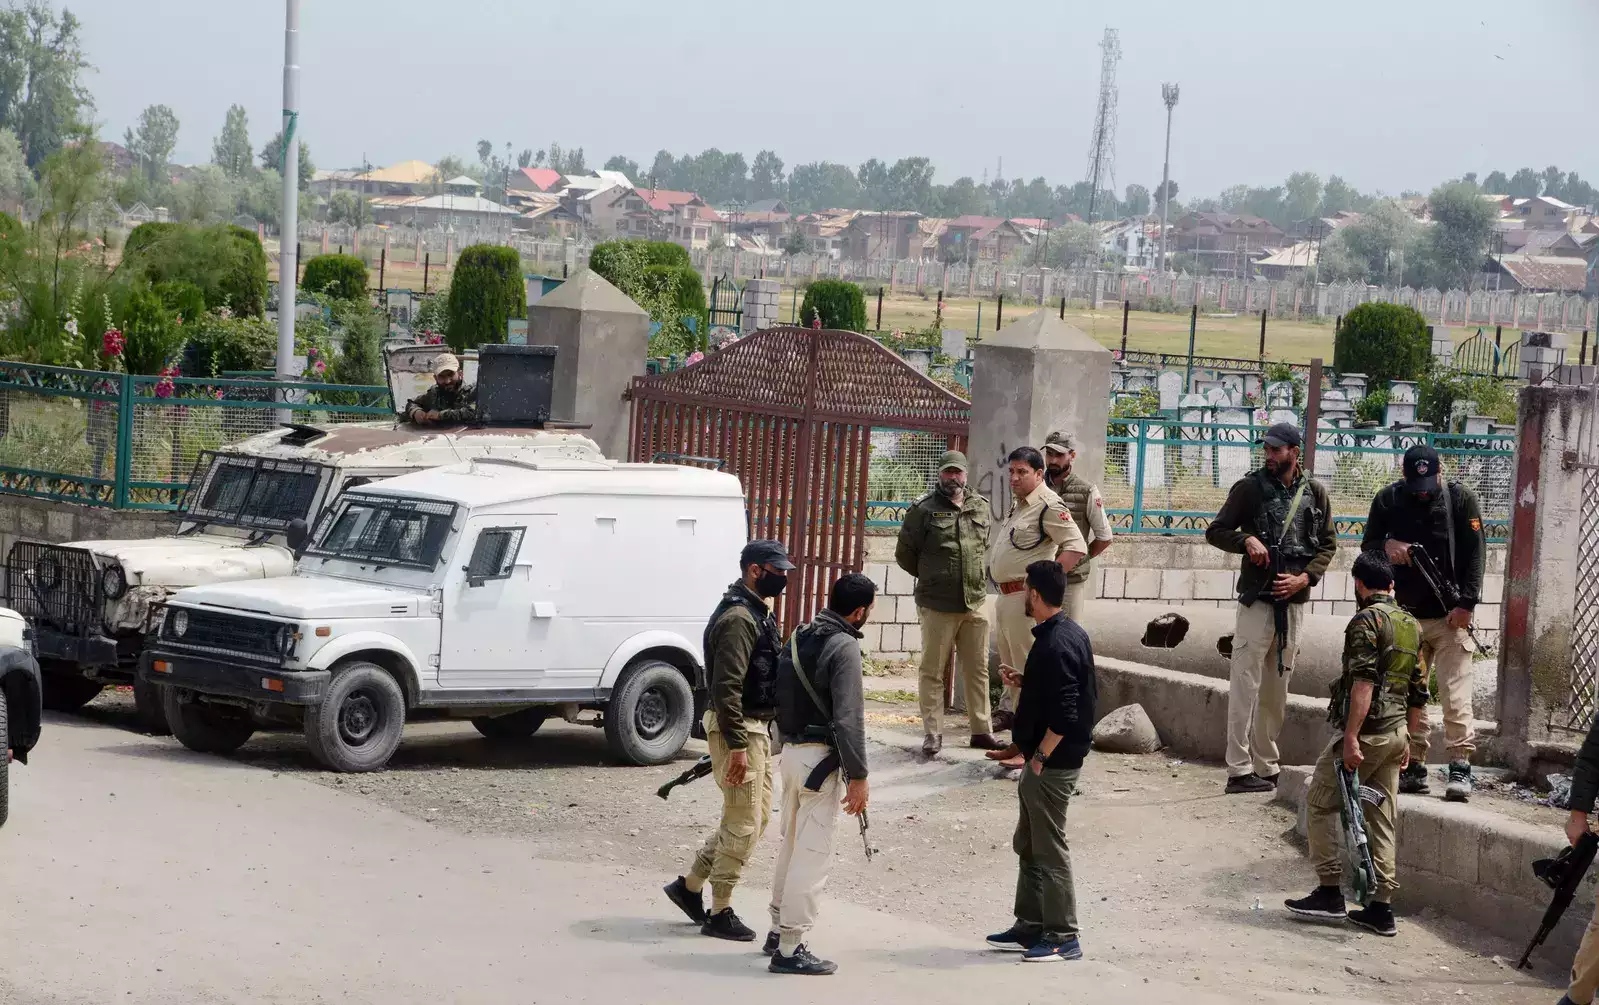 A red alert has been put out in the city of Srinagar, capital of the state of Jammu and Kashmir in India over reports of an IED threat to Security Forces